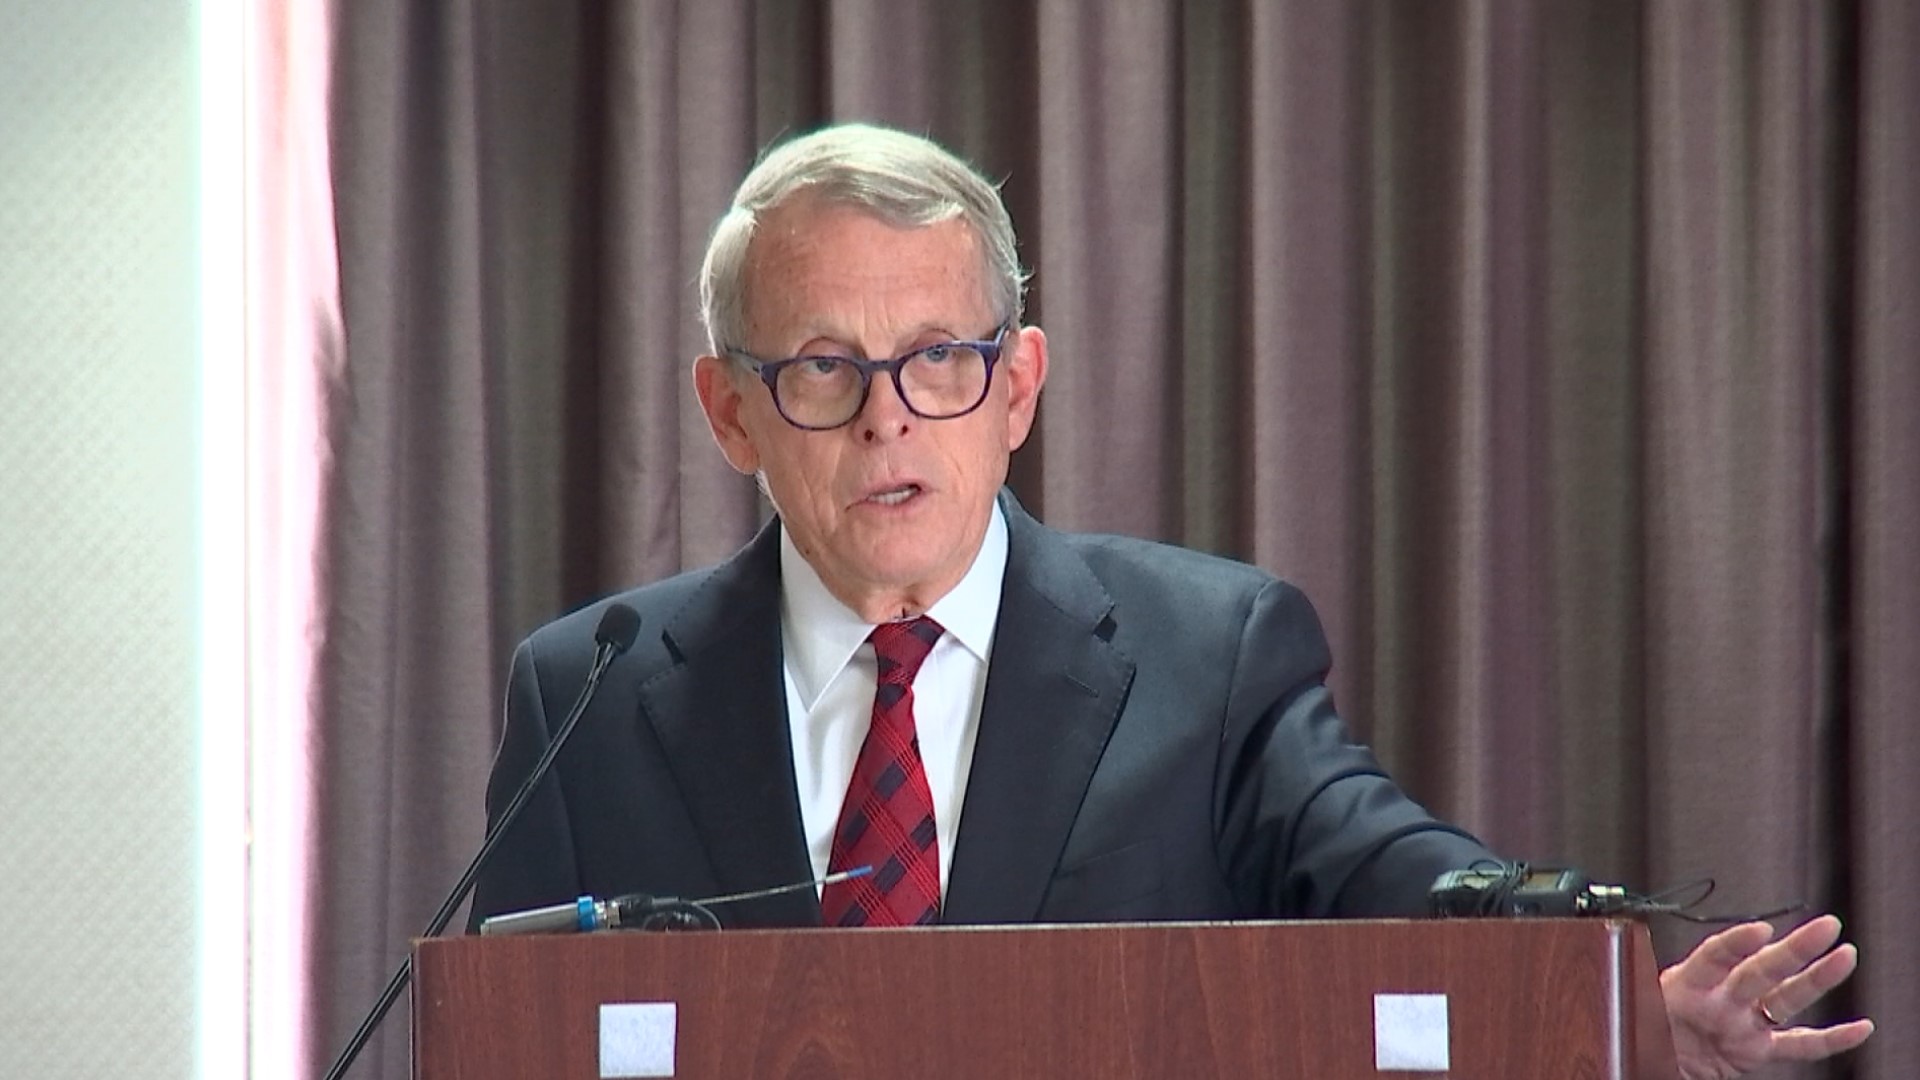 DeWine has 10 days to make a decision on the bill from when he physically received it.